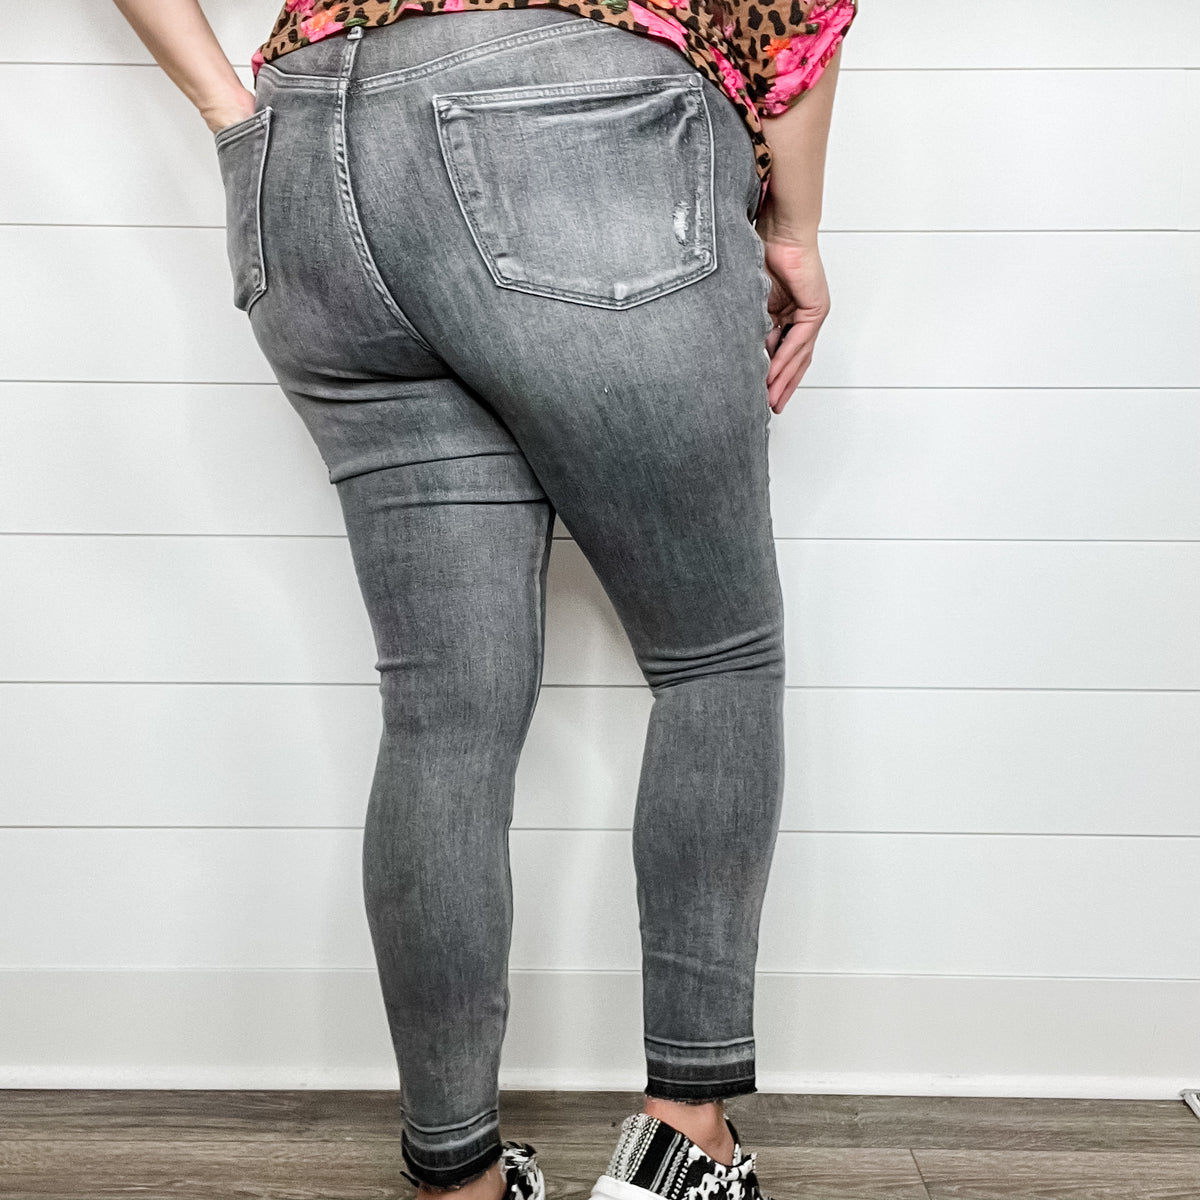 Judy Blue "THE BEST EVER" Grey Tummy Control Jeans